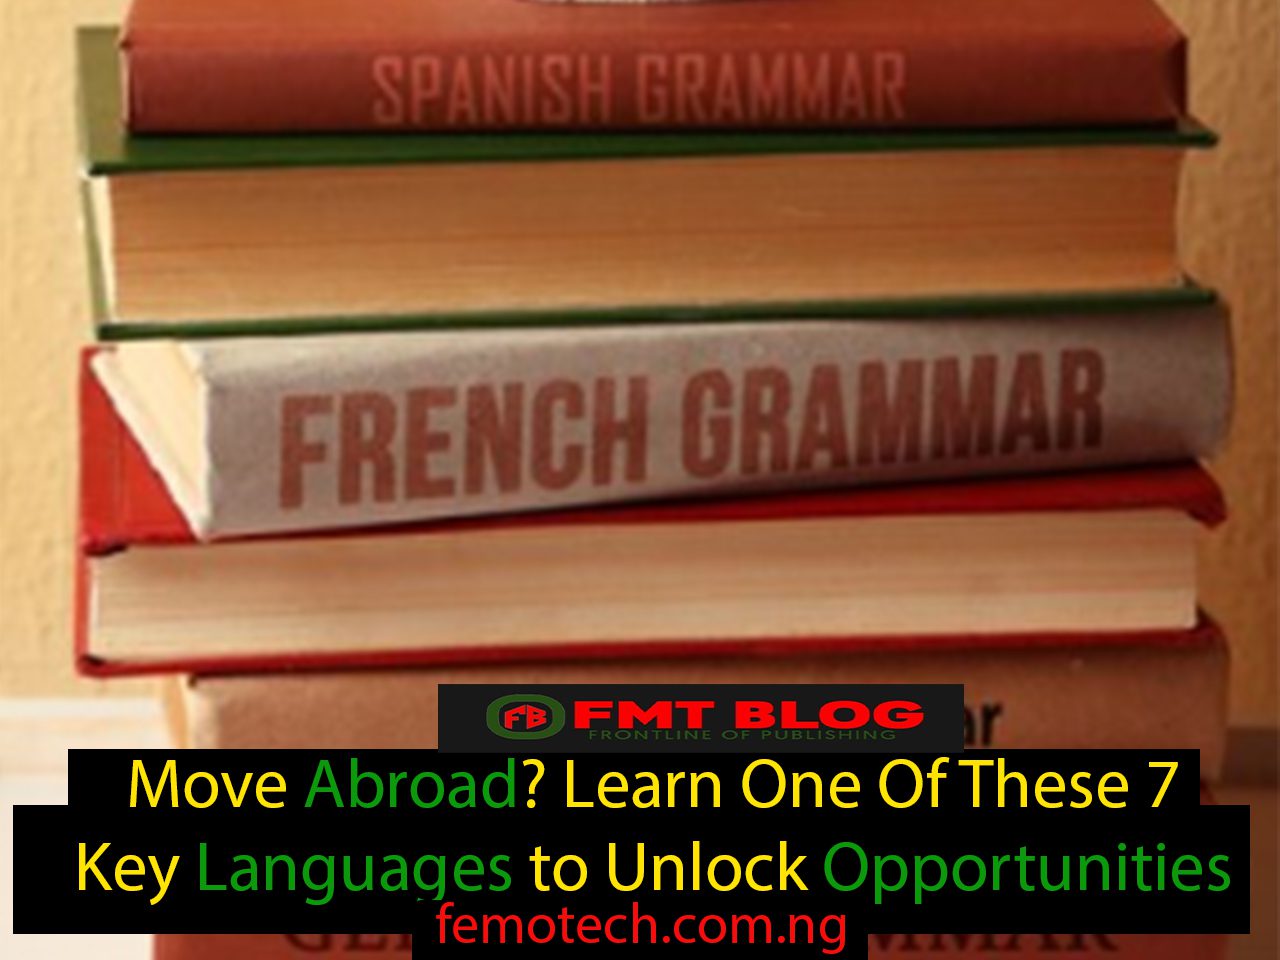 Move Abroad? Learn One Of These 7 Key Languages to Unlock Opportunities